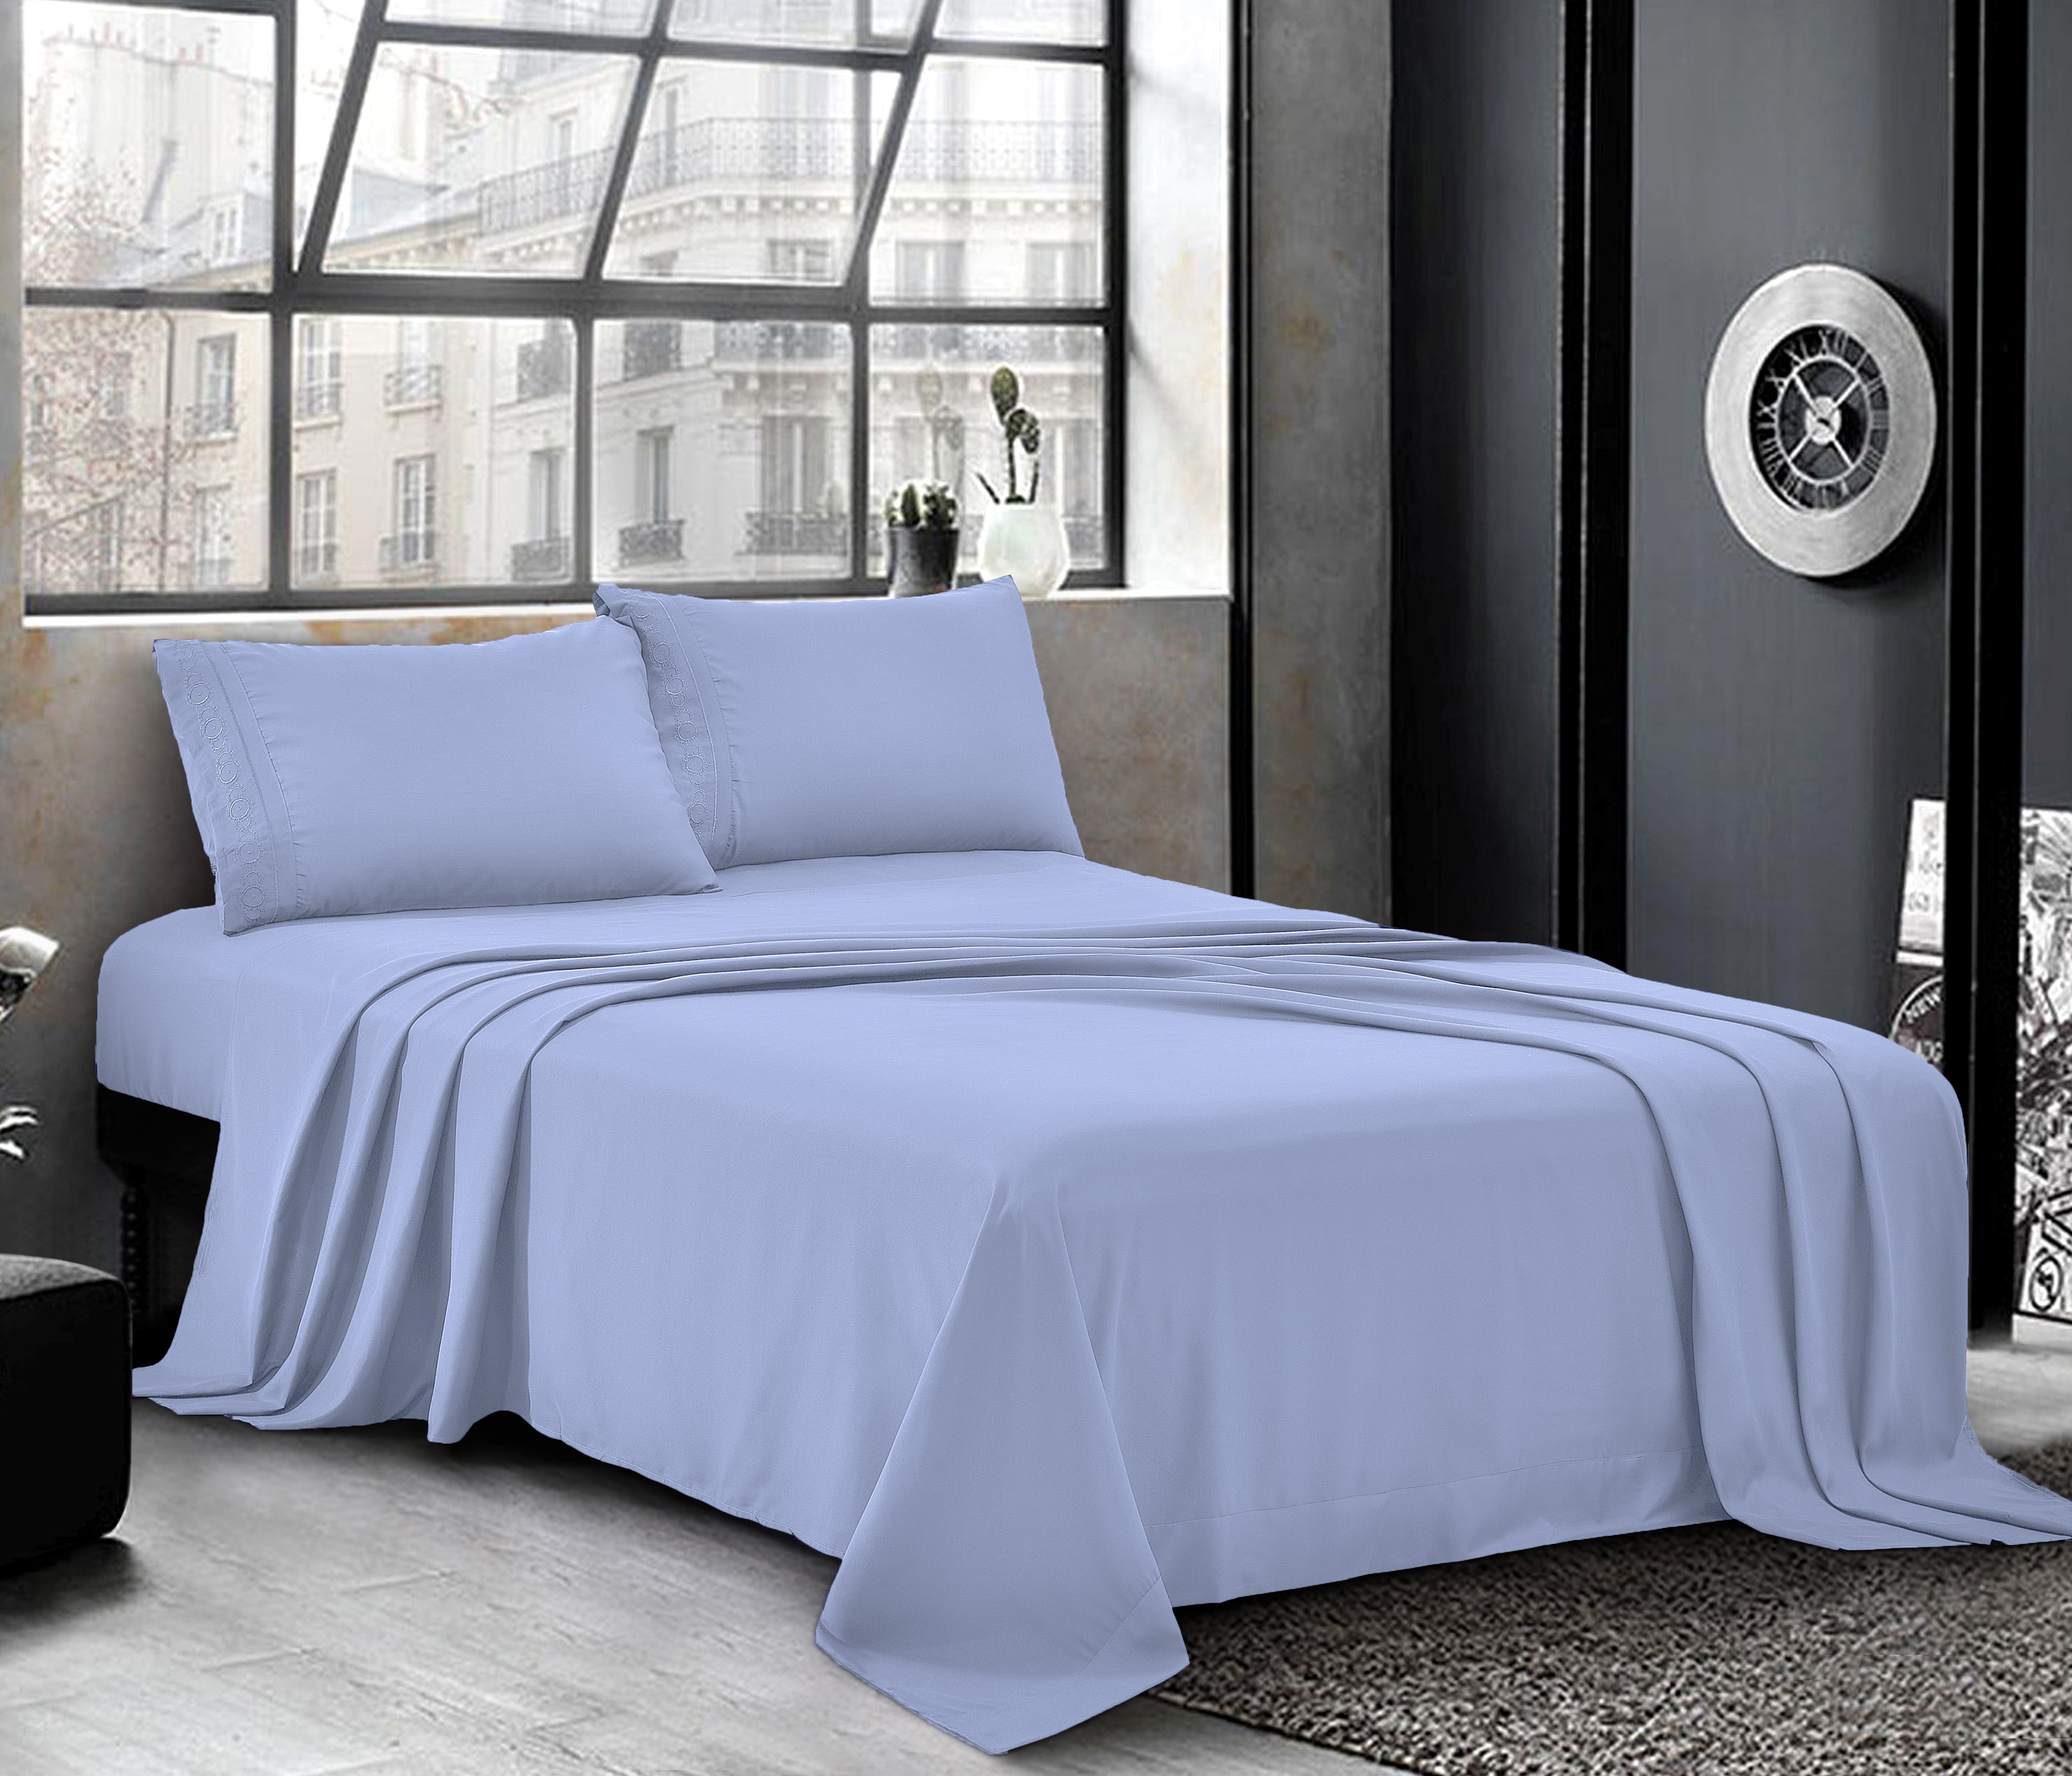 3 piece Bed Sheet Set 1 Flat Sheet,1 Fitted Sheet and 1 Pillow Cases,Brushed Microfiber Luxury Bedding with Deep Pockets Single,Blue